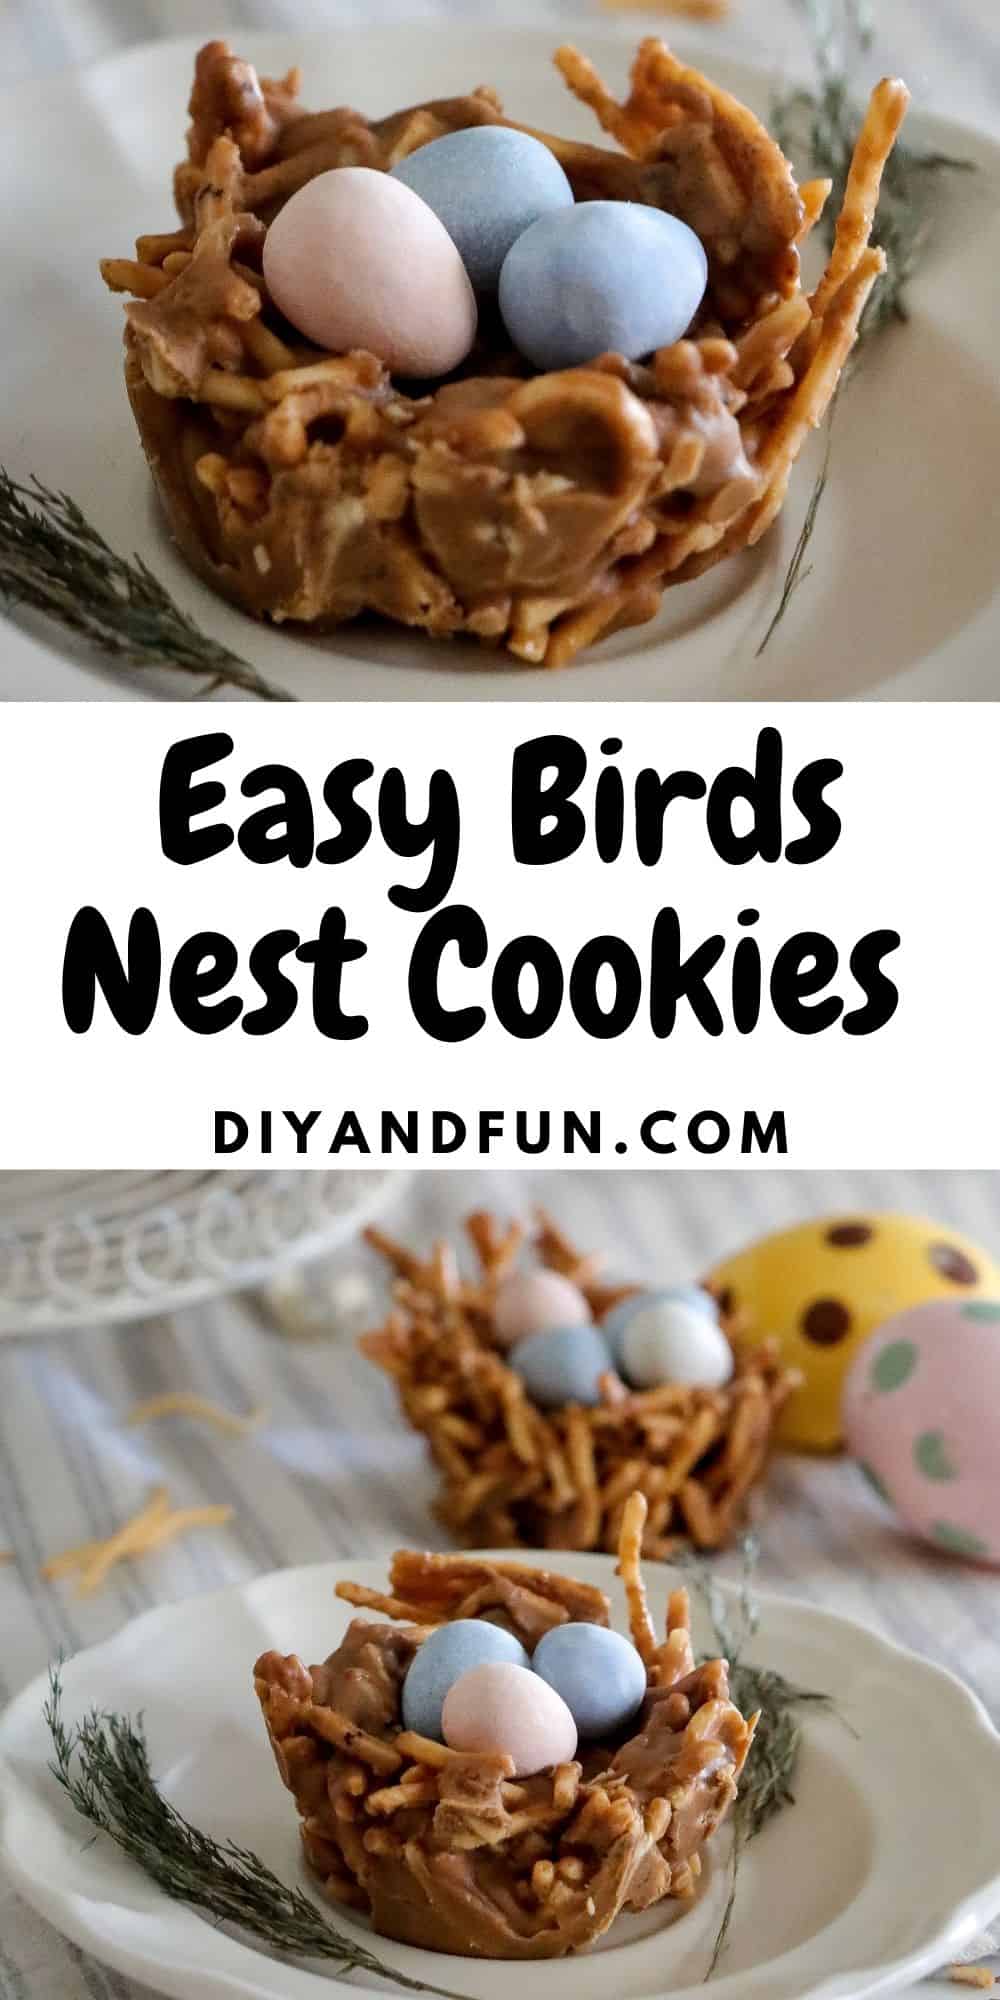 Easy Birds Nest Cookies, a Spring and Easter inspired cookie made with chow mein noodles and formed into a nest shape.